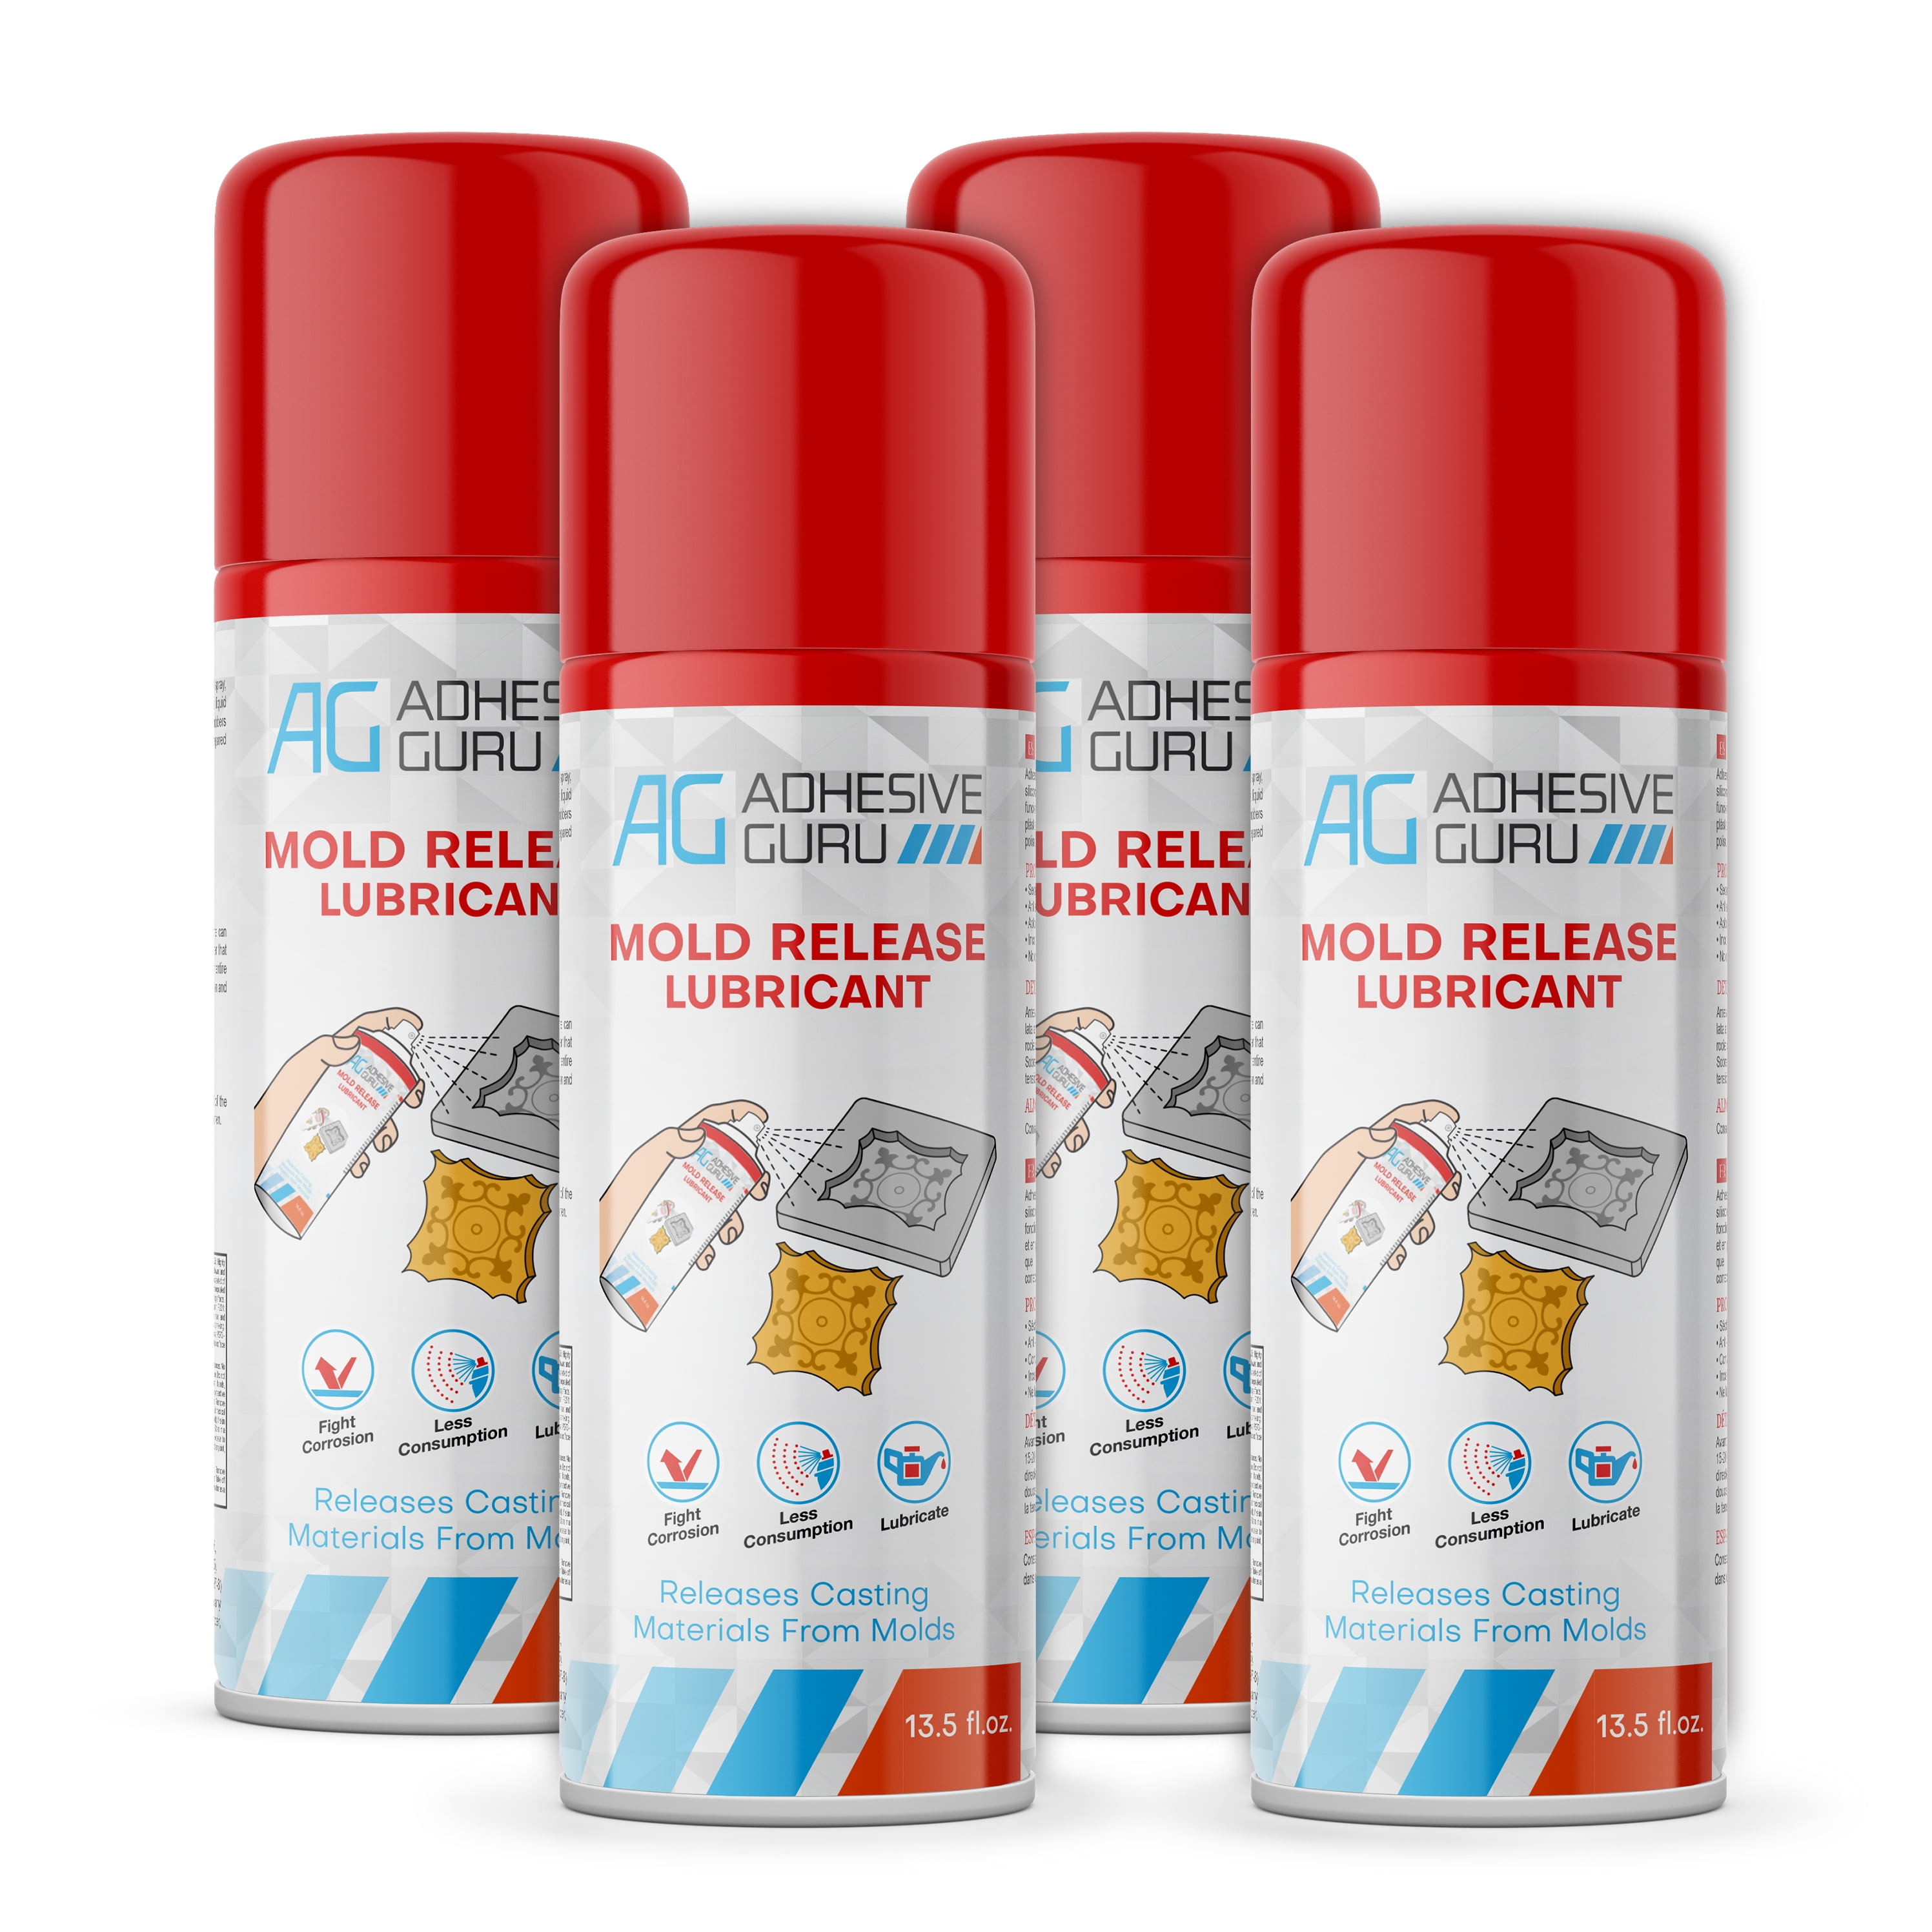  Mold Release, Silicone Mold Release Spray (3x16.9 fl oz/500ml)  Mold Release for Epoxy Resin and Candle Mold Release Spray (3 Pack Mega  Size)